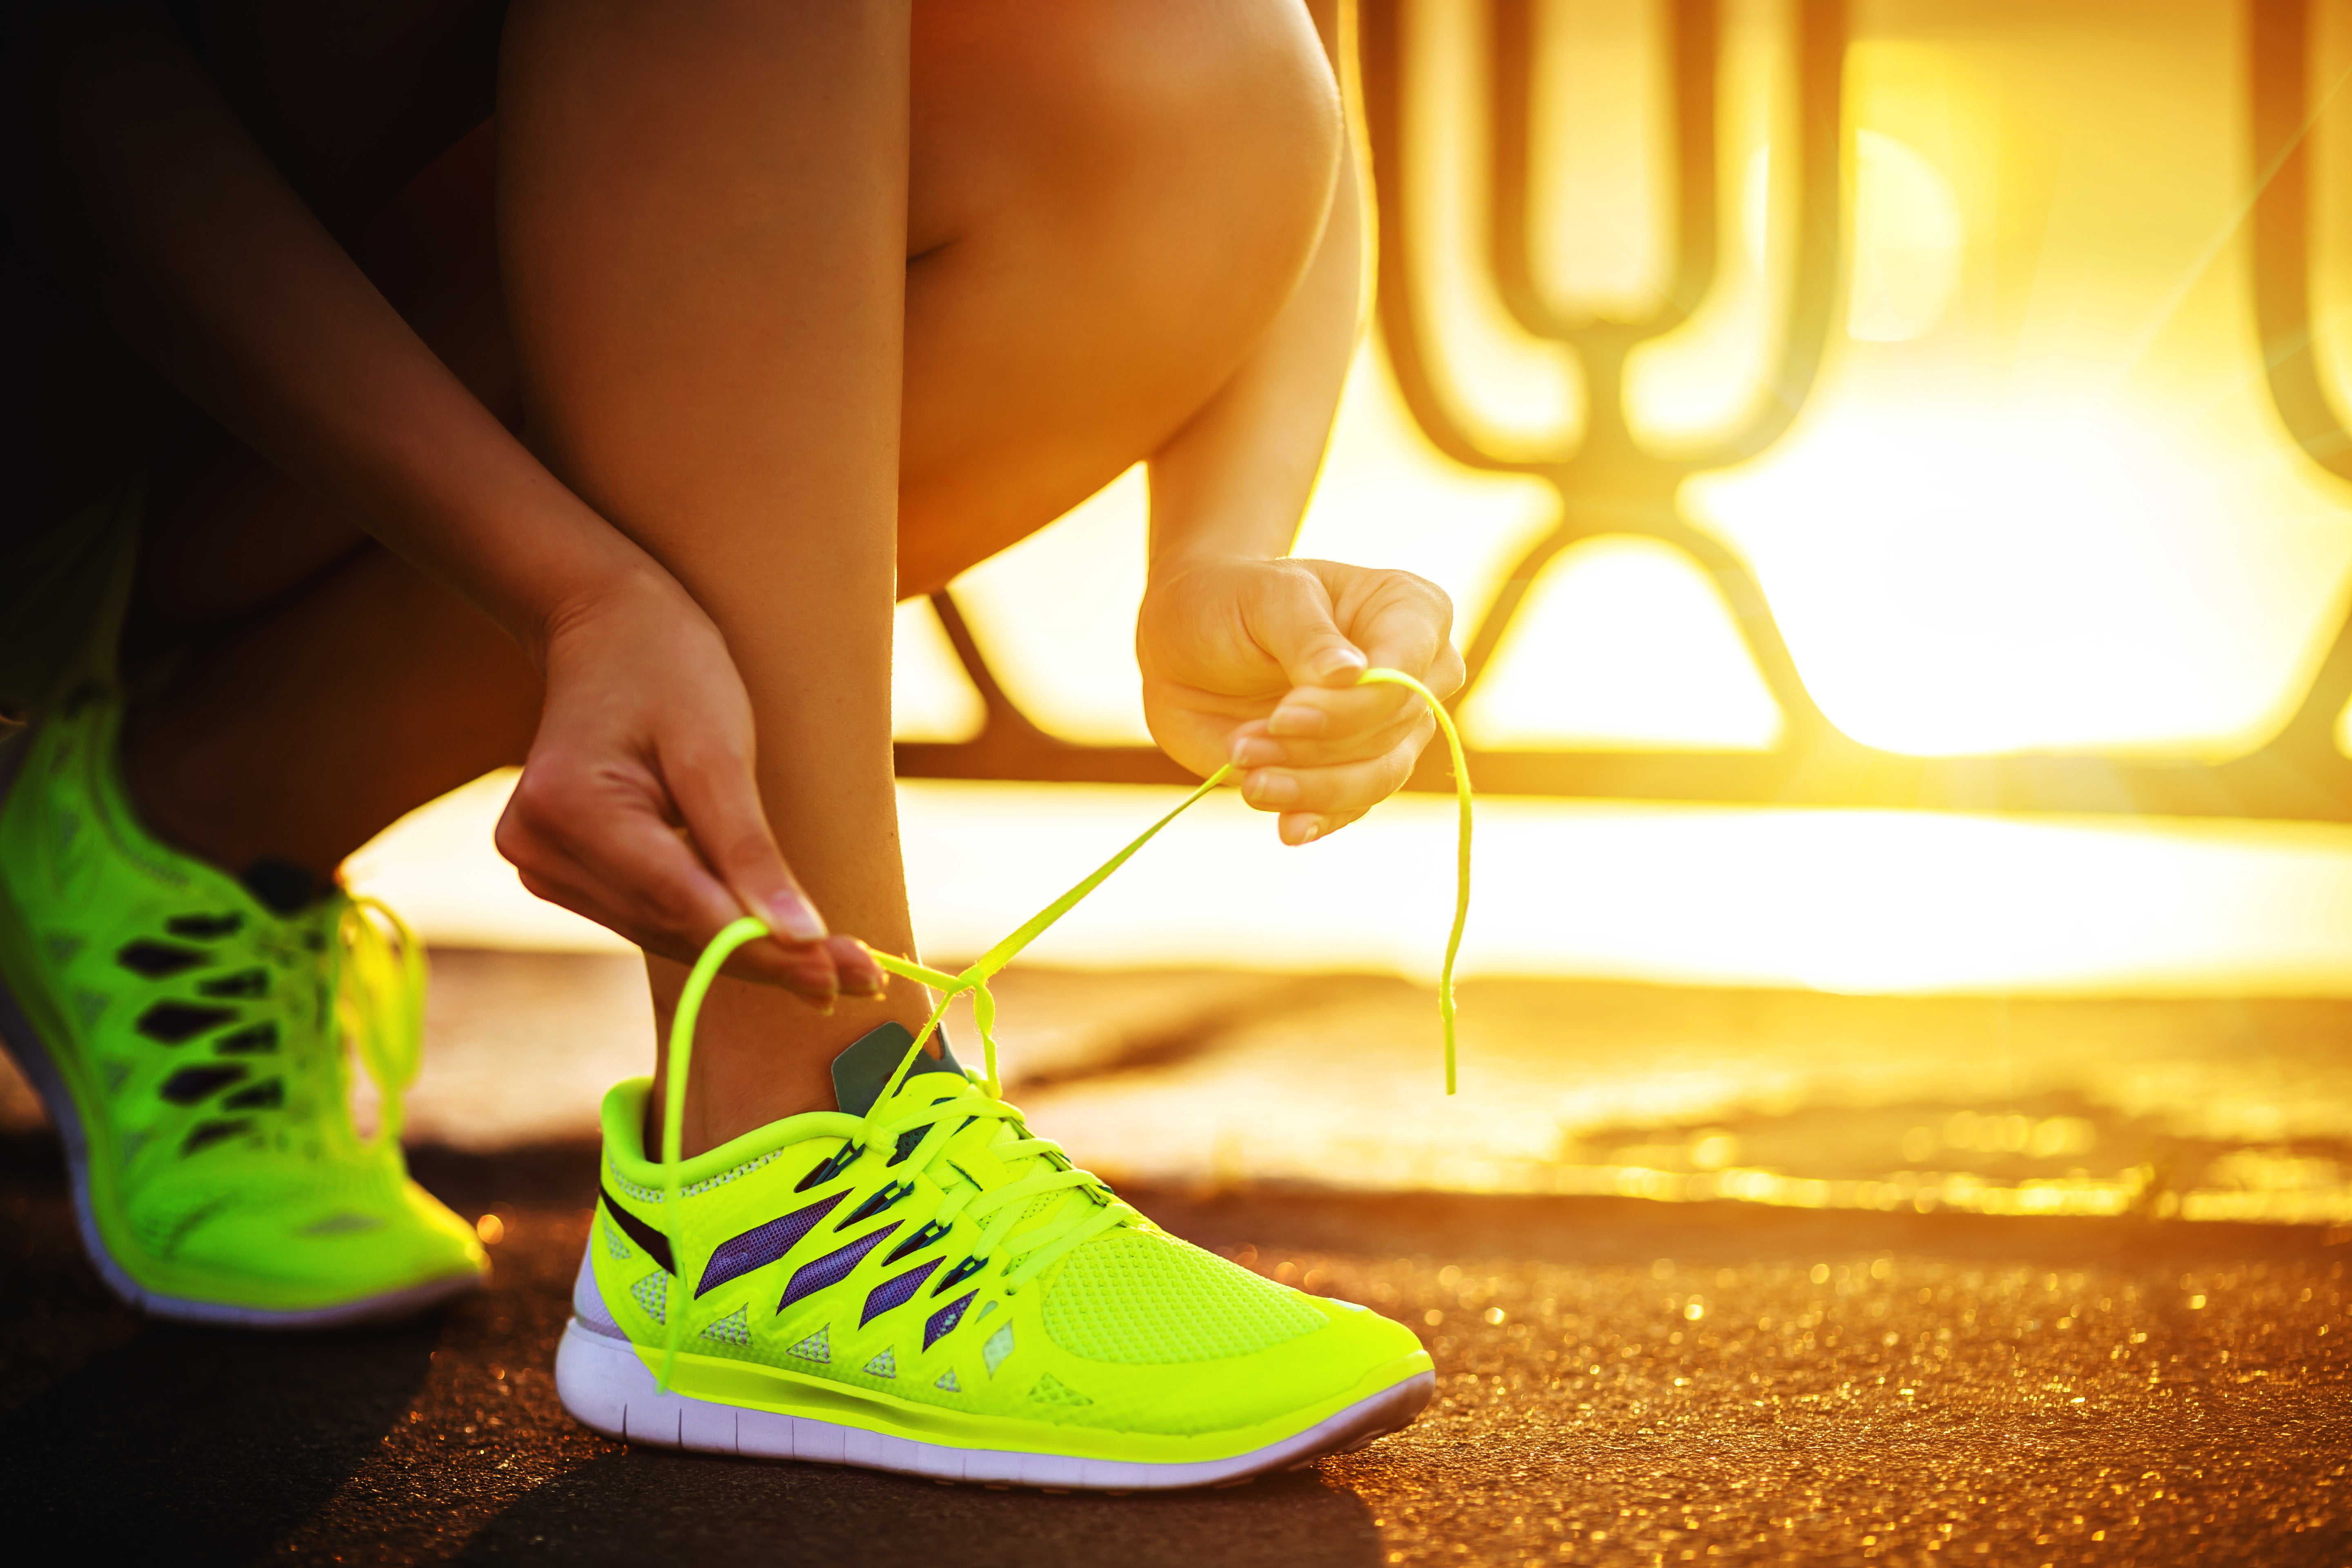 3840x2160 resolution | person tying shoe lace, running, shoes, lace ...